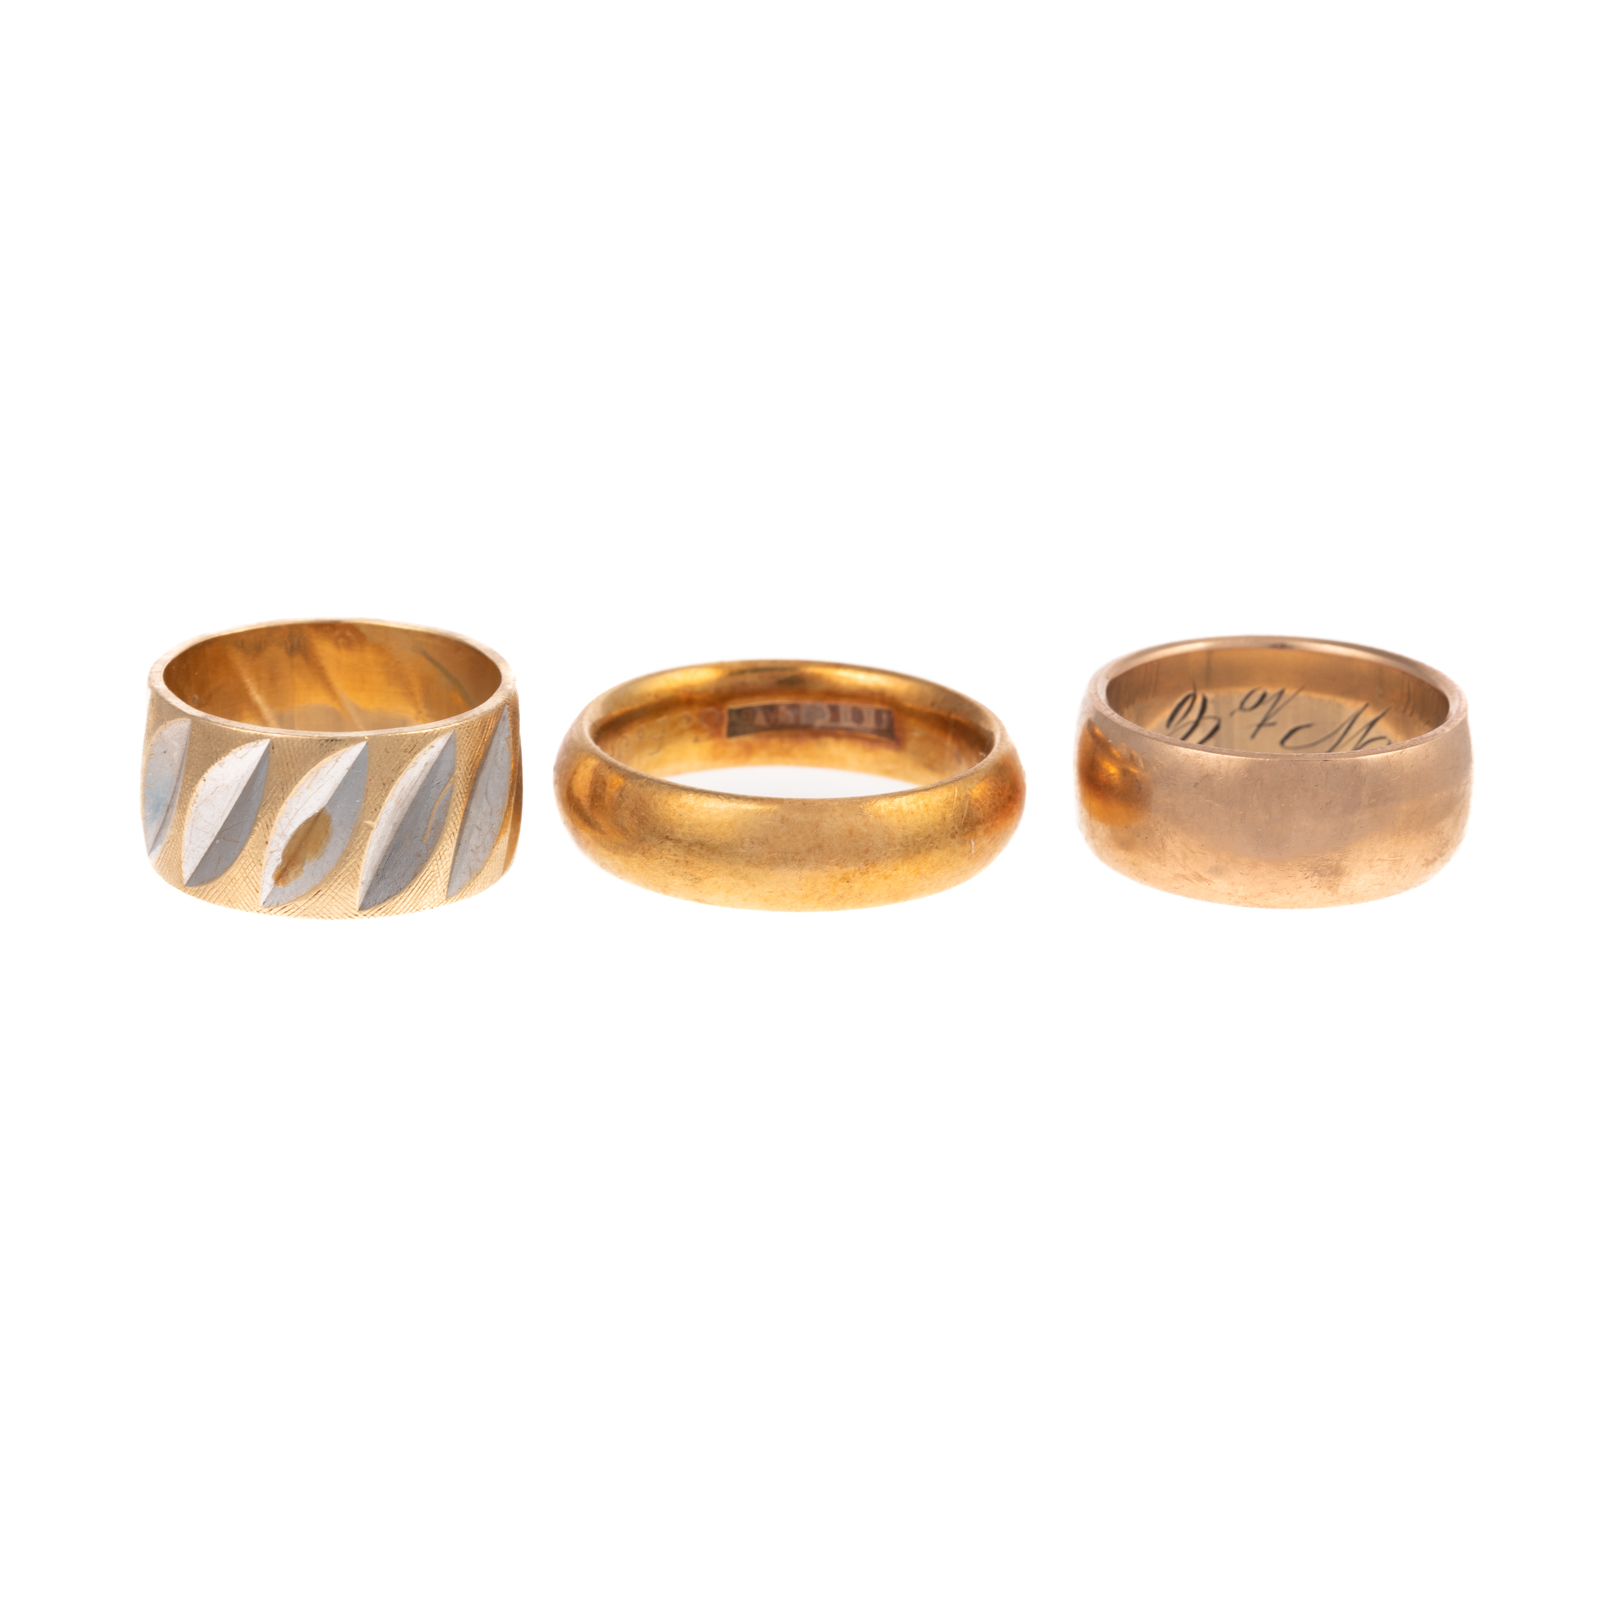 A TRIO OF VINTAGE GOLD BANDS IN